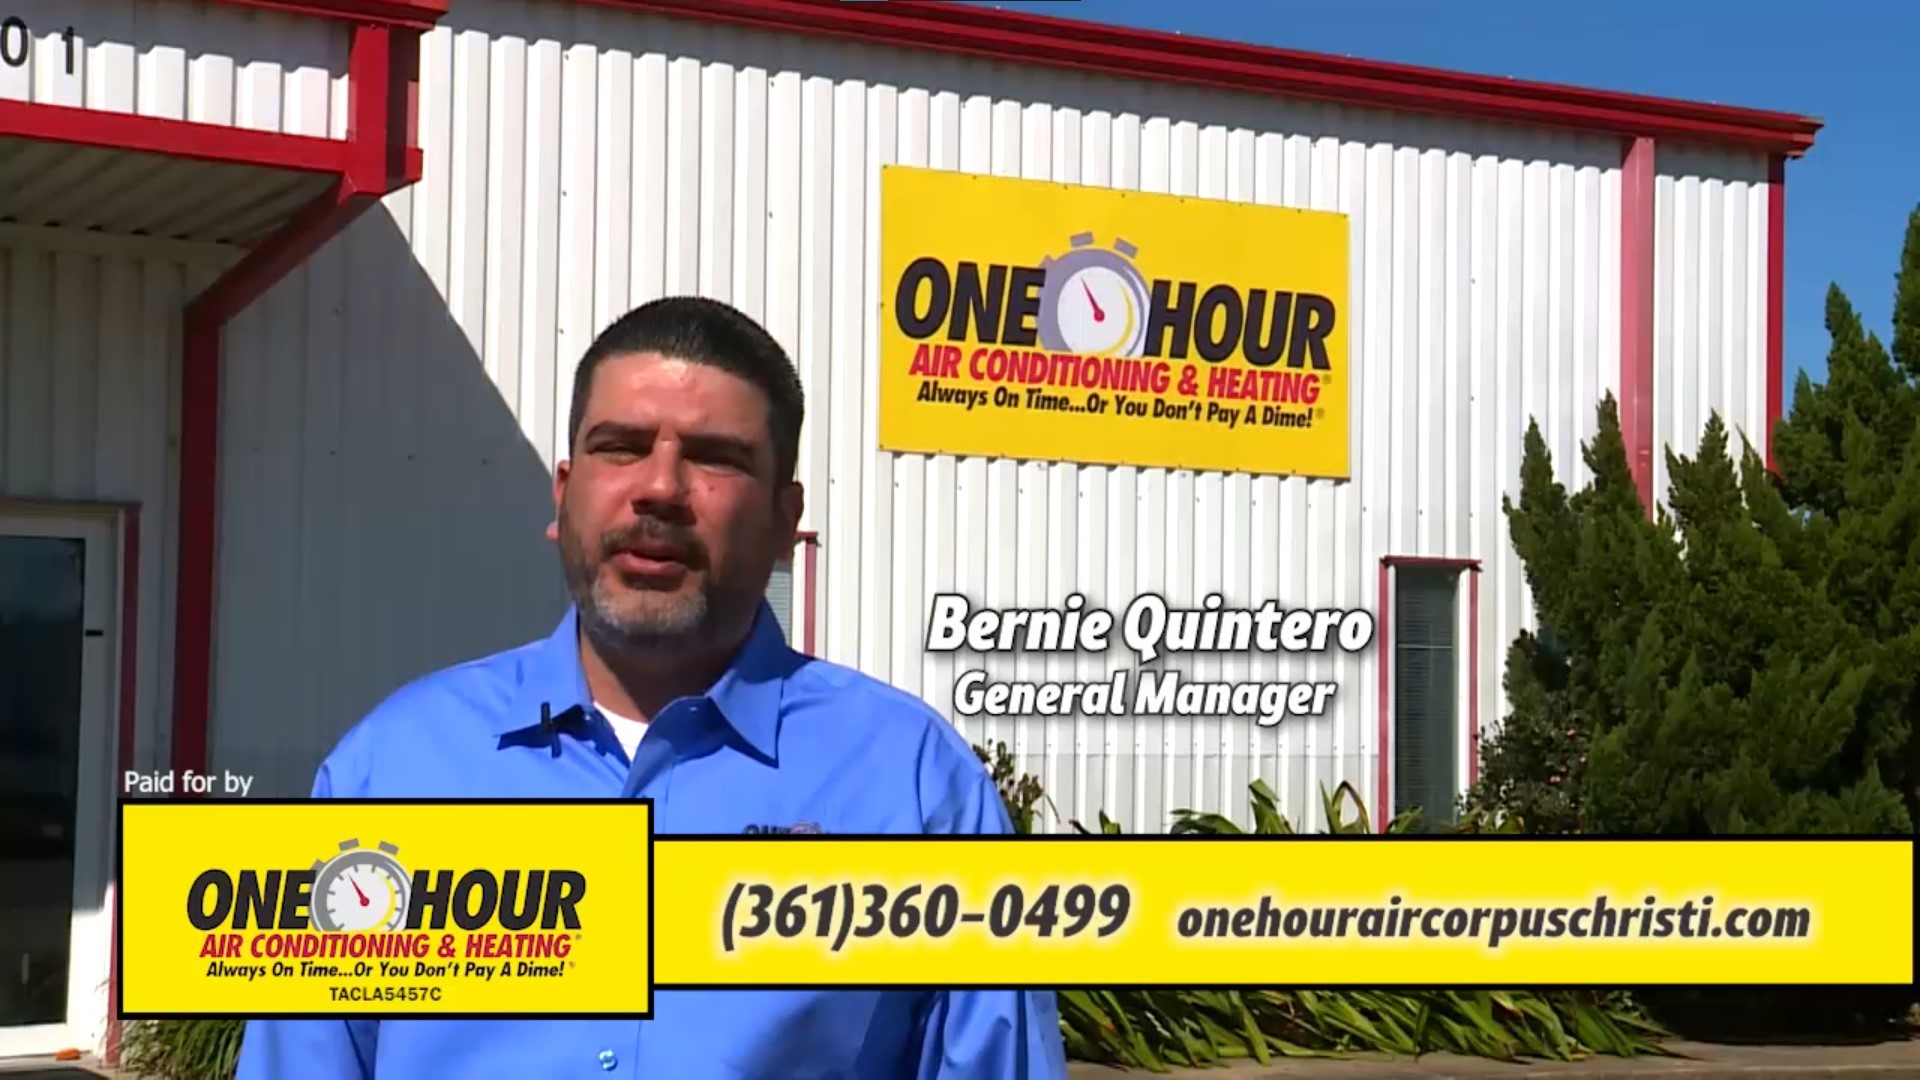 One Hour Air Conditioning & Heating discusses the importance of indoor air quality.